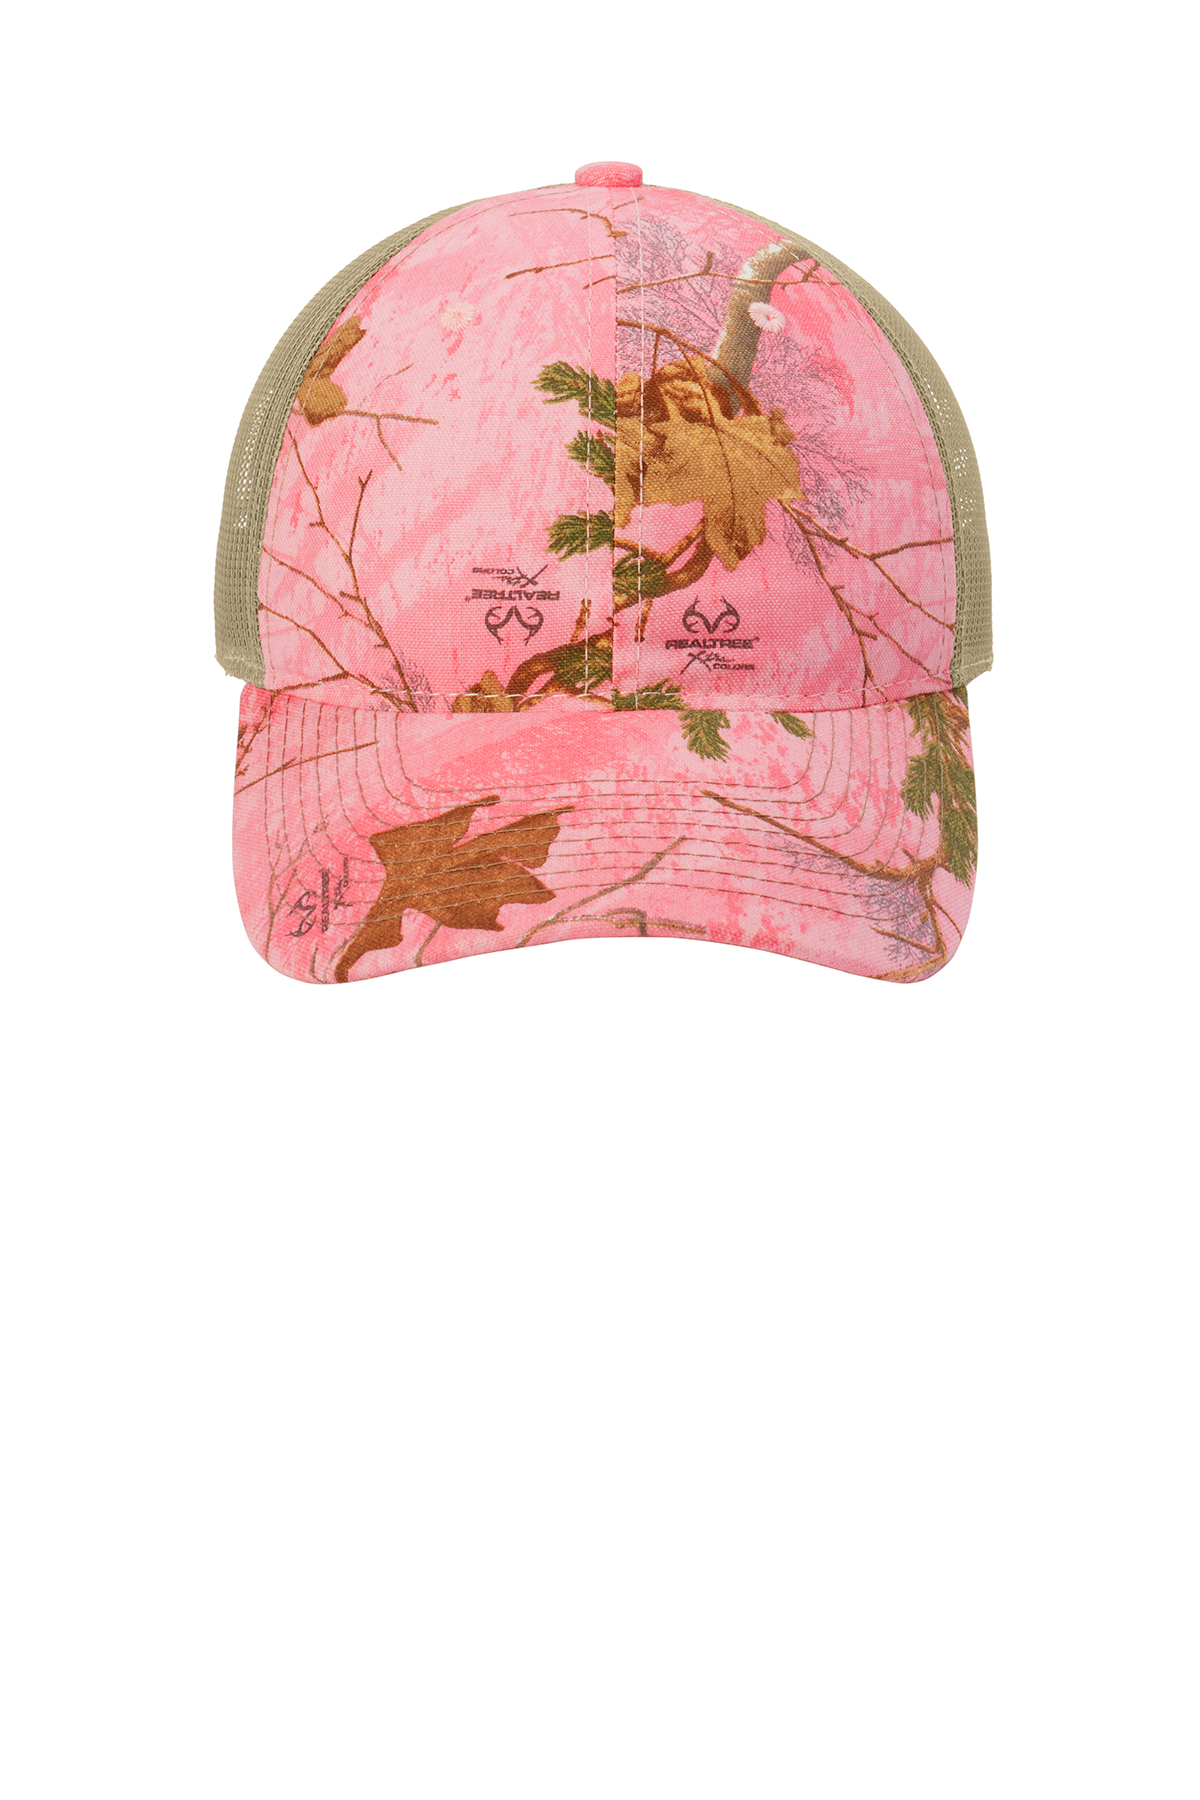 Headwear Conceal Pink True Timber Camouflage 6 Panel Cap - 4201